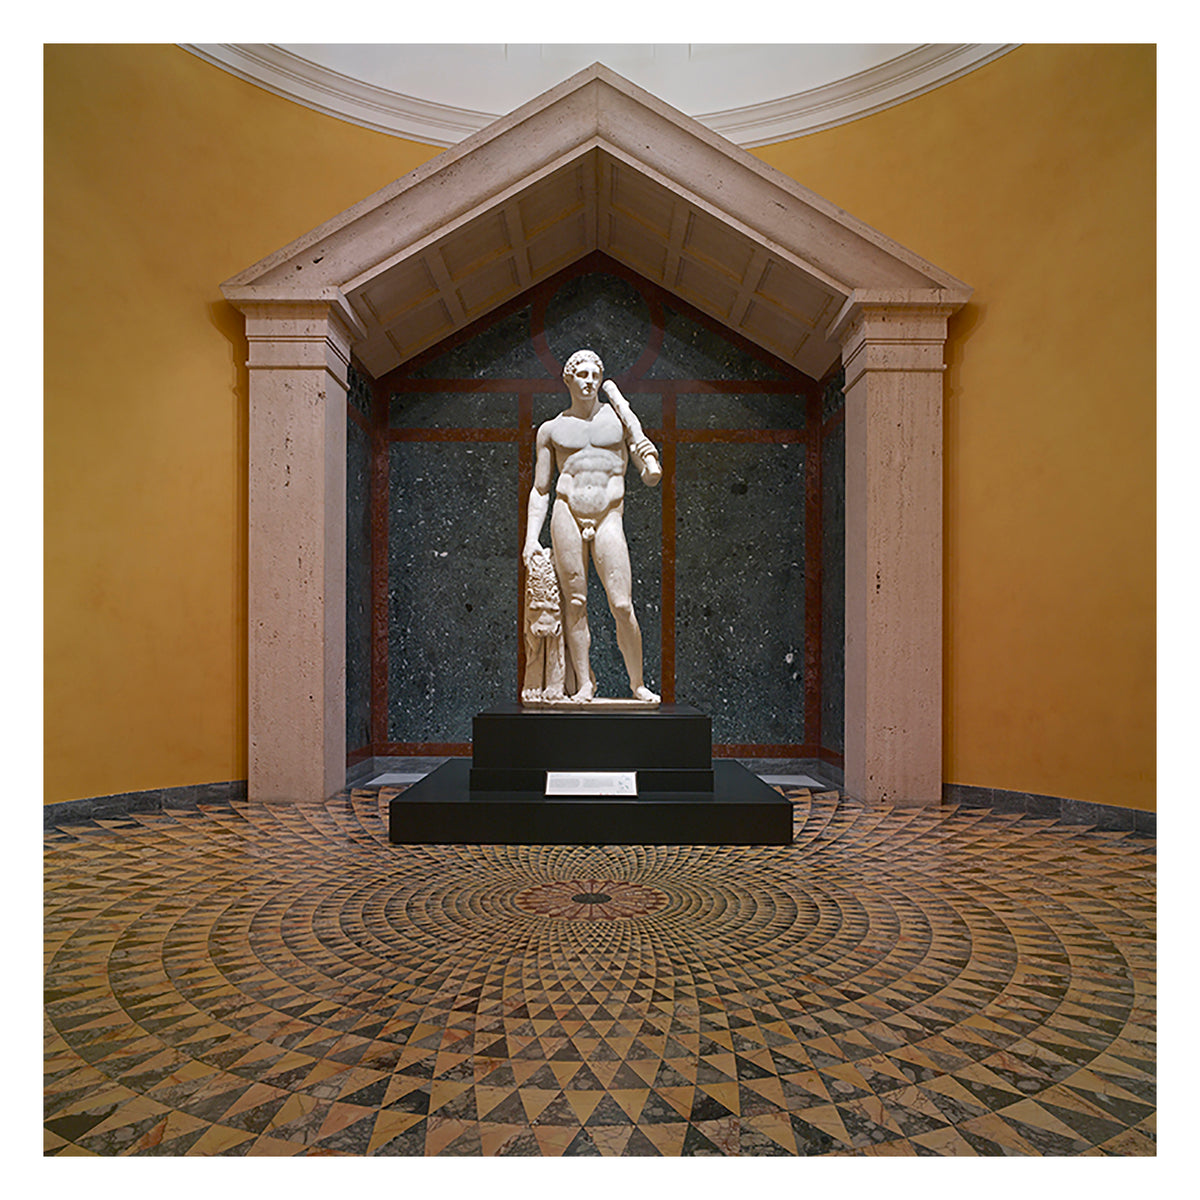 Getty Villa Mosaic Mind Bender Puzzle-Temple of Hercules inspiration for puzzle | Getty Store